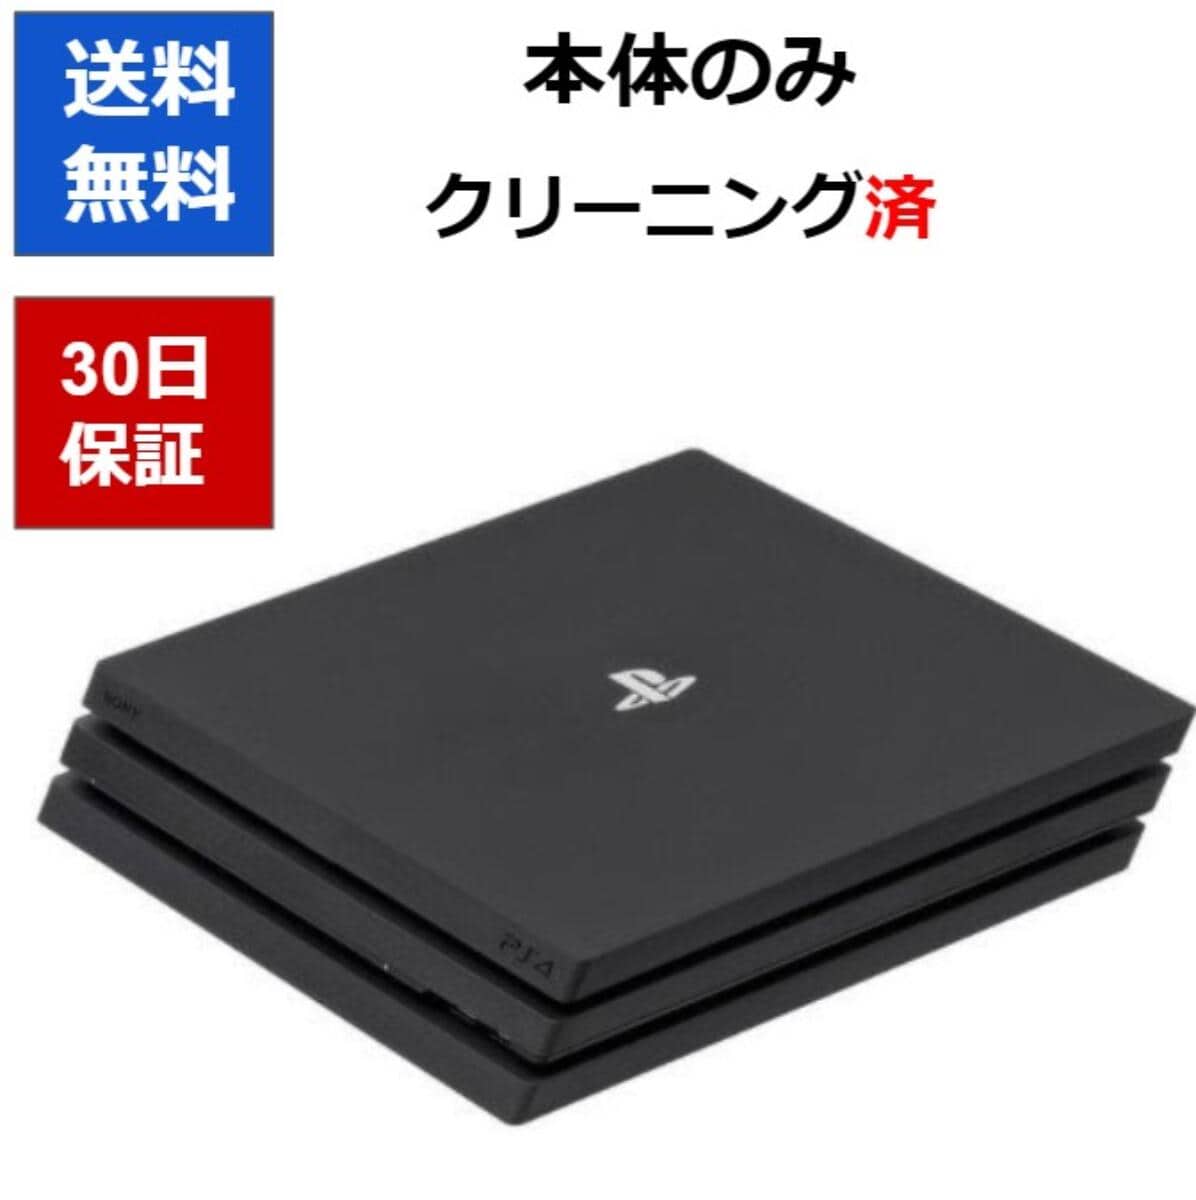 Used]Only as for PS4 PlayStation 4 Play Station 4 Black 1TB CUH-7100BB01 ,  it is PlayStation4 SONY SONY - BE FORWARD Store